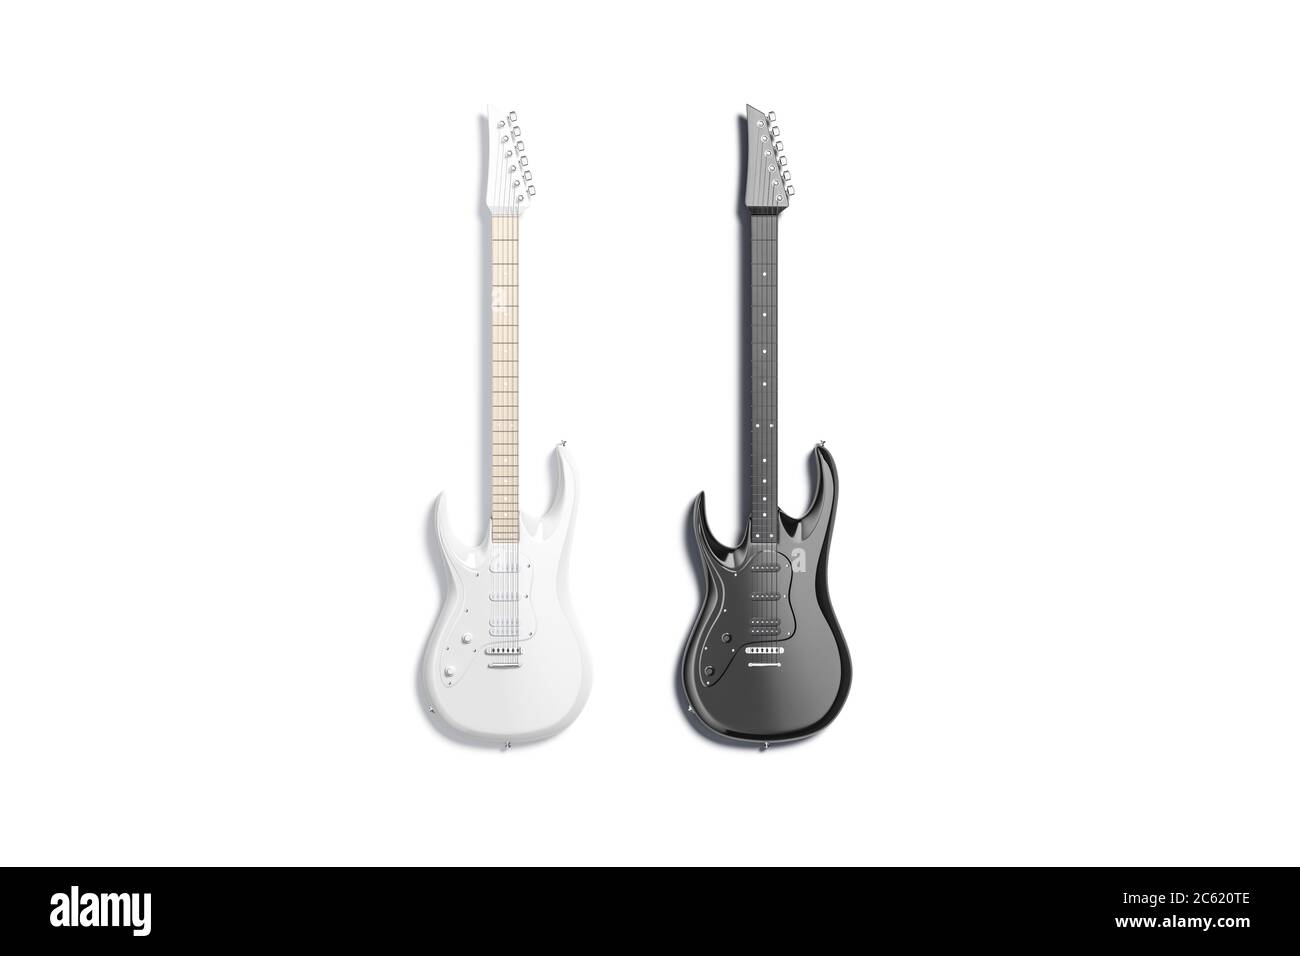 Blank black and white electric guitar mockup set, top view Stock Photo